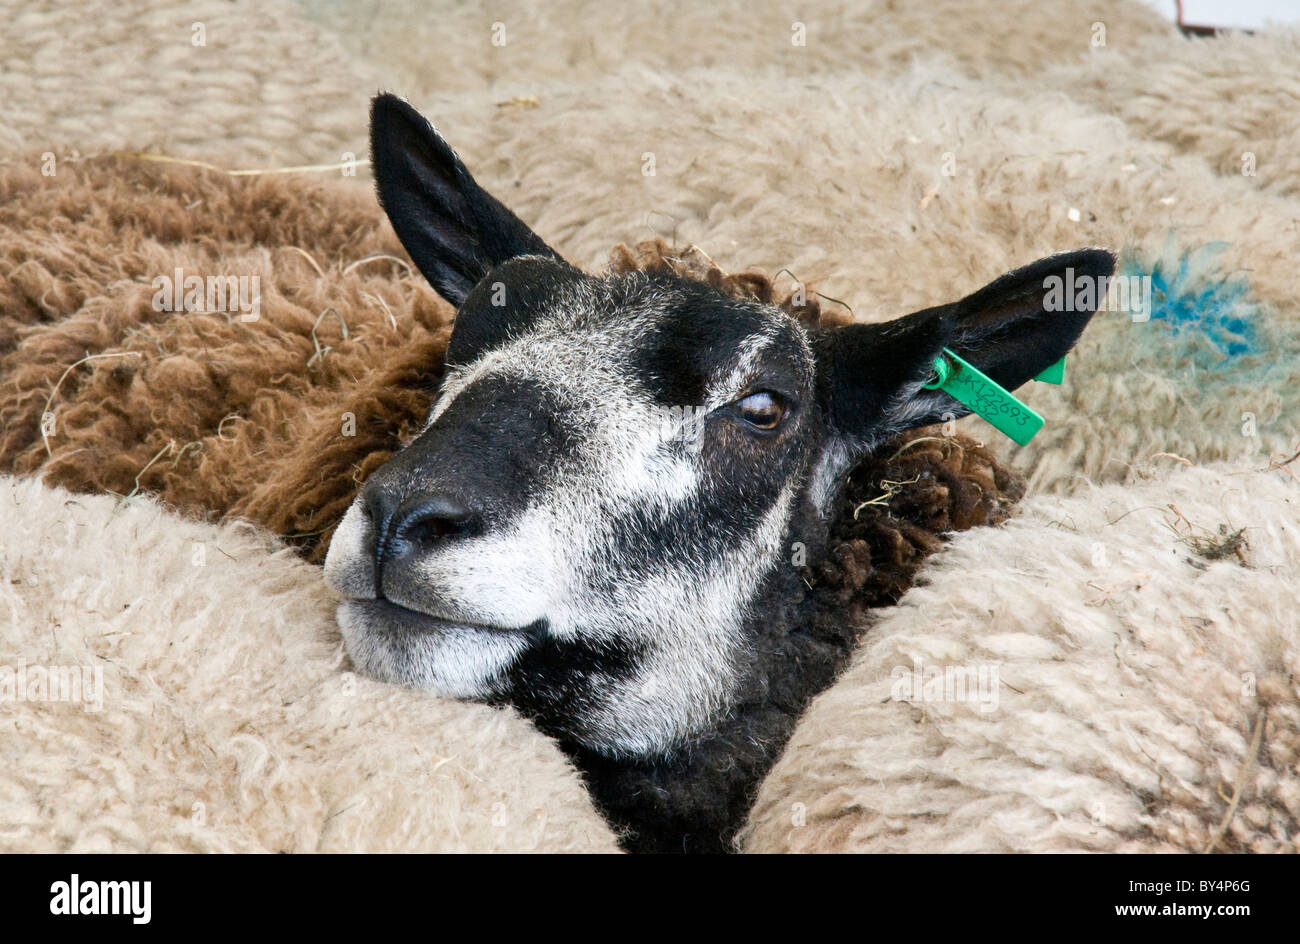 black sheep in pen, hemmed in by other sheep. Stock Photo